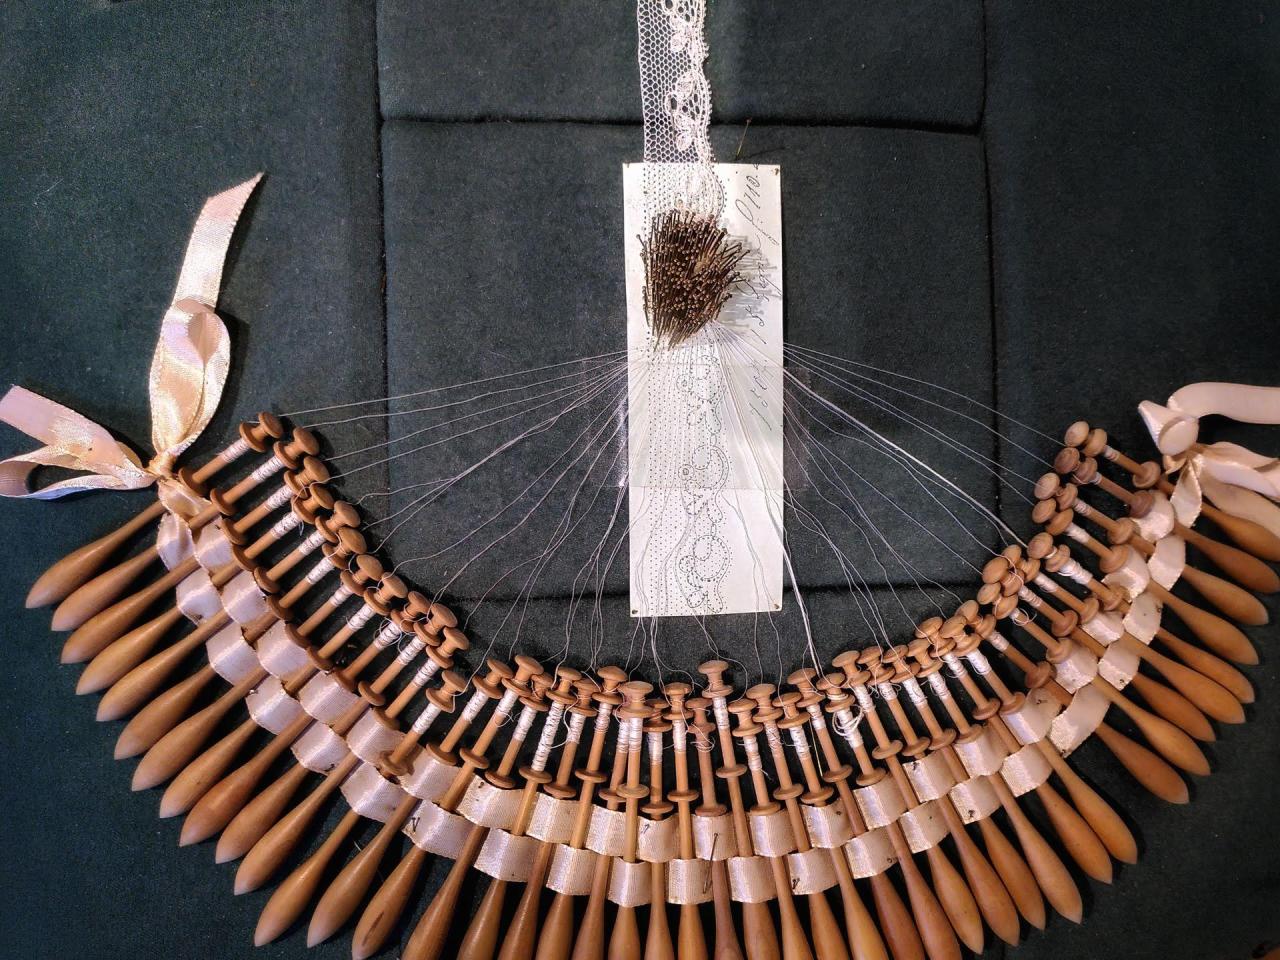 A lace ribbon interrupted in its creation, with a pin-board and array of Bobbins, on display